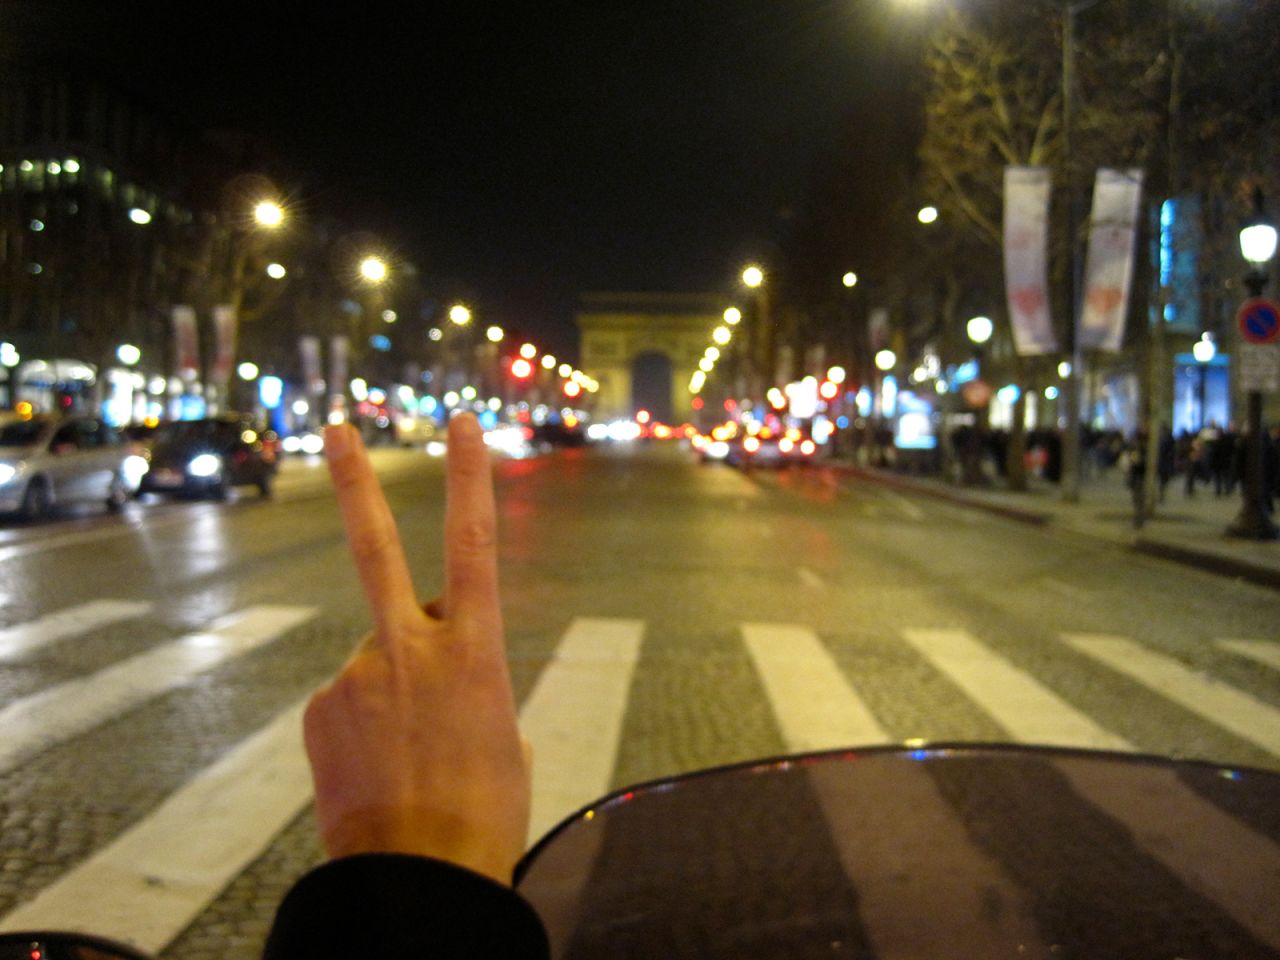 Michelle took this photograph on the back of Augustin's moped on their first date in Paris.